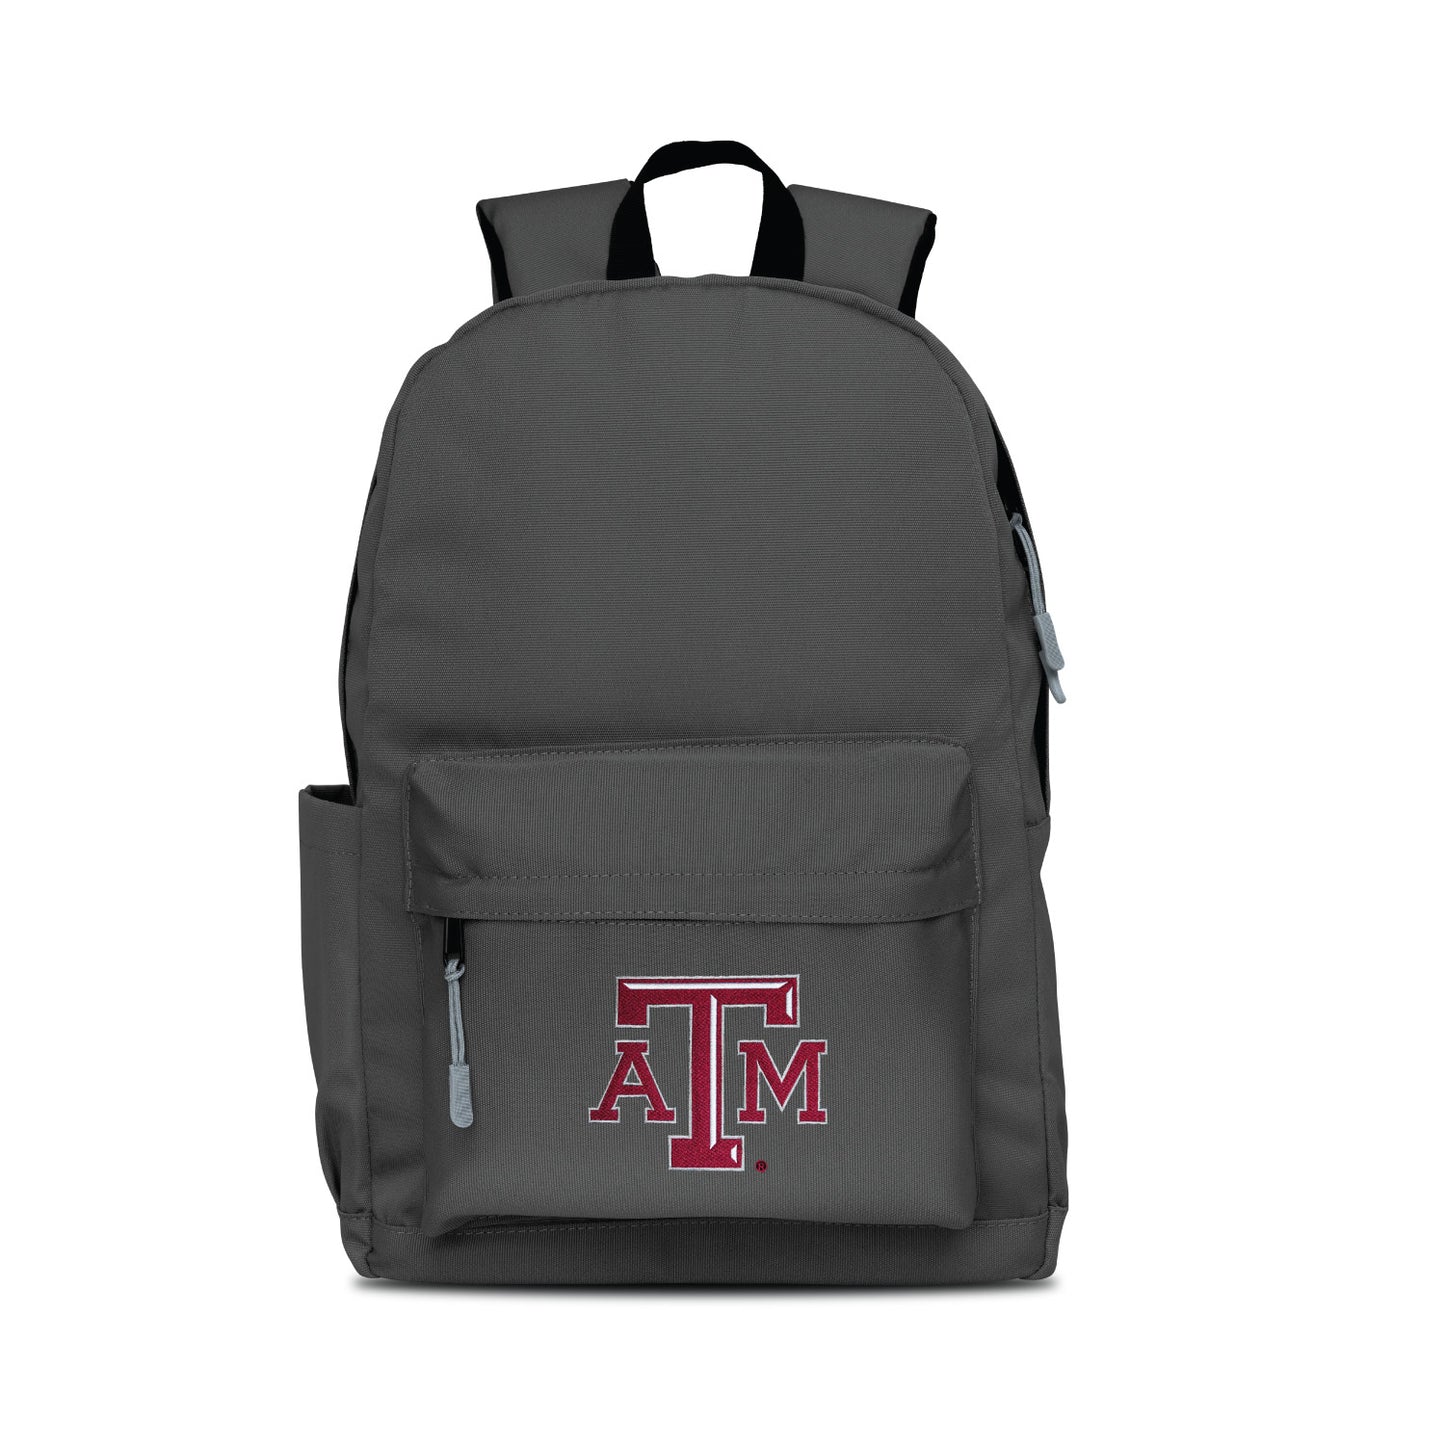 Texas A&M Aggies Campus Laptop Backpack- Gray